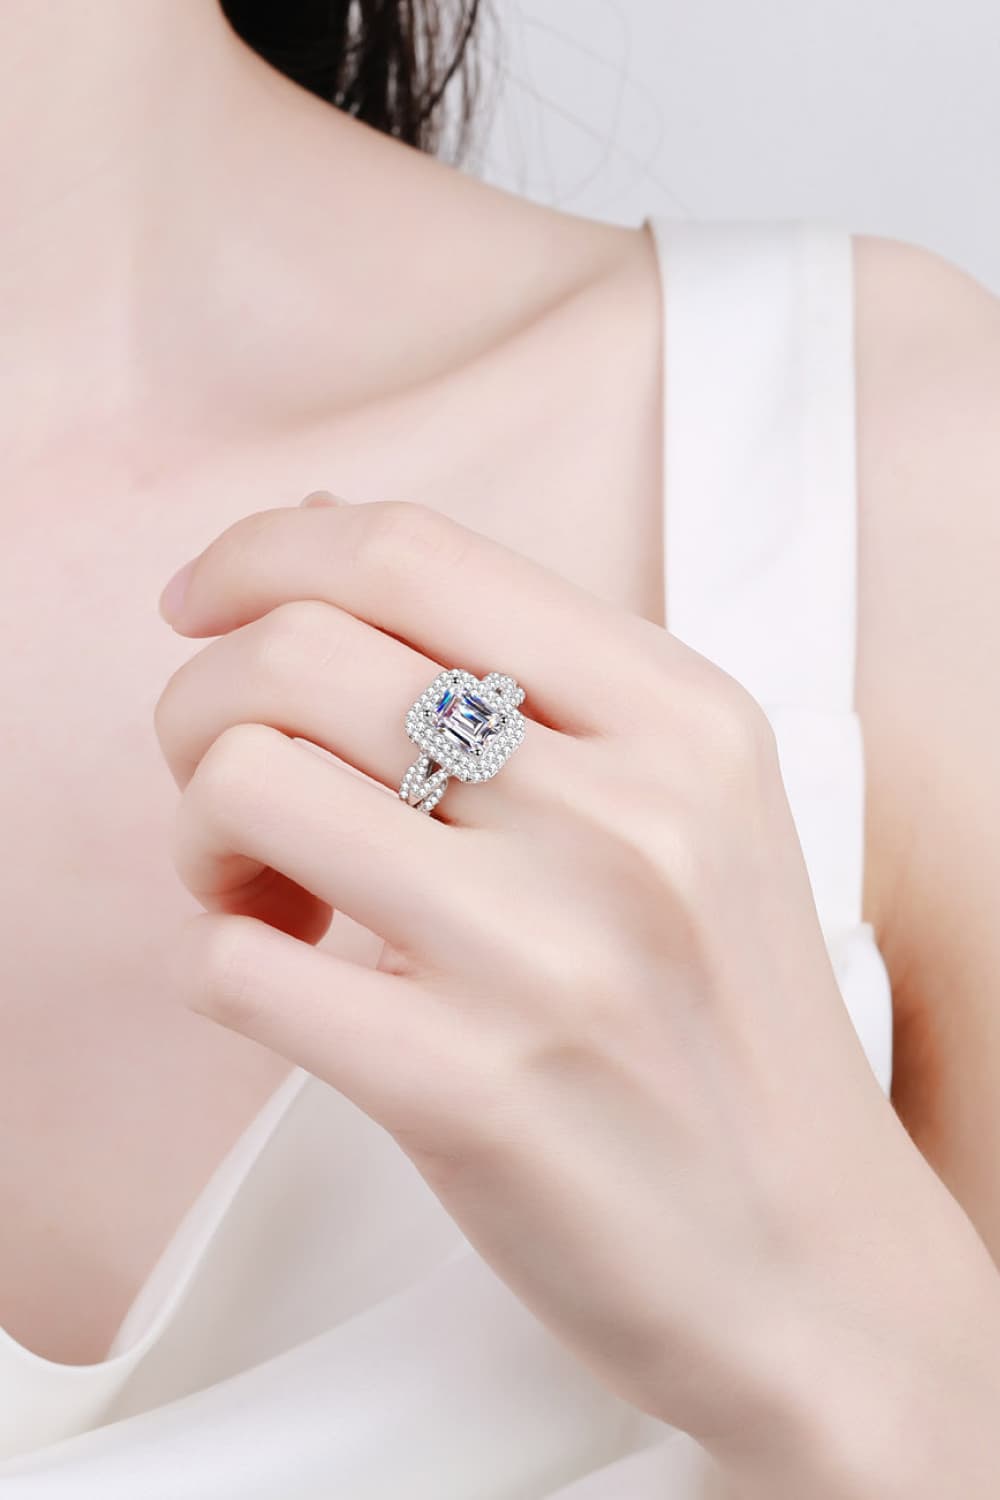 Can't Stop Your Shine 2 Carat Moissanite Ring - Dash Trend